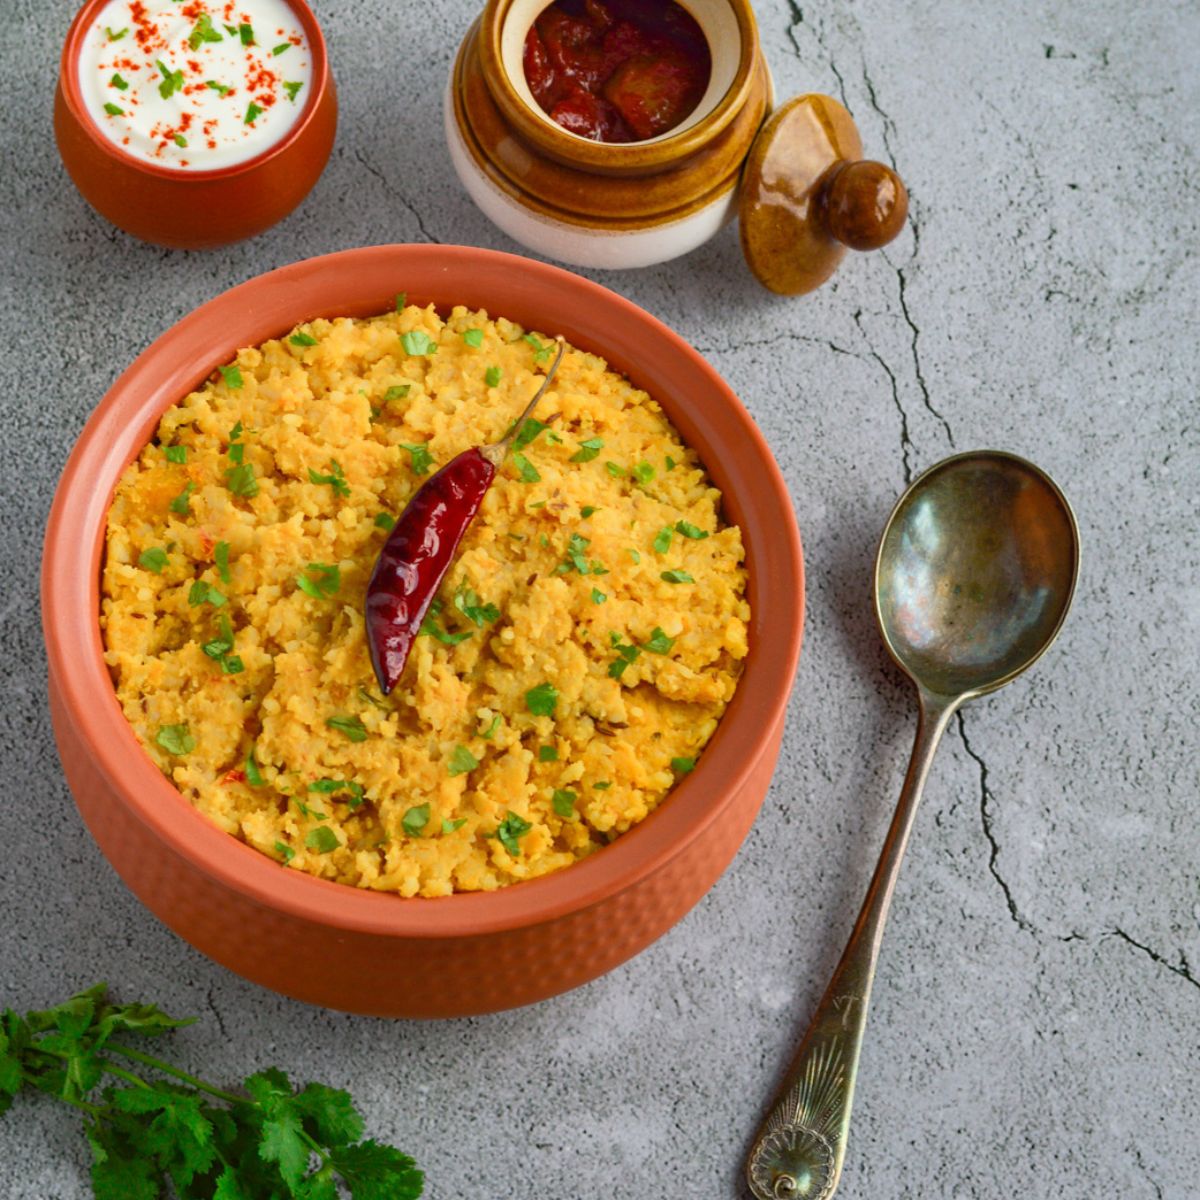 khichdi in a brown bowl placed on a granite along with twigs of coriander, serving spoon, a bowl of yogurt and bowl of pickle.